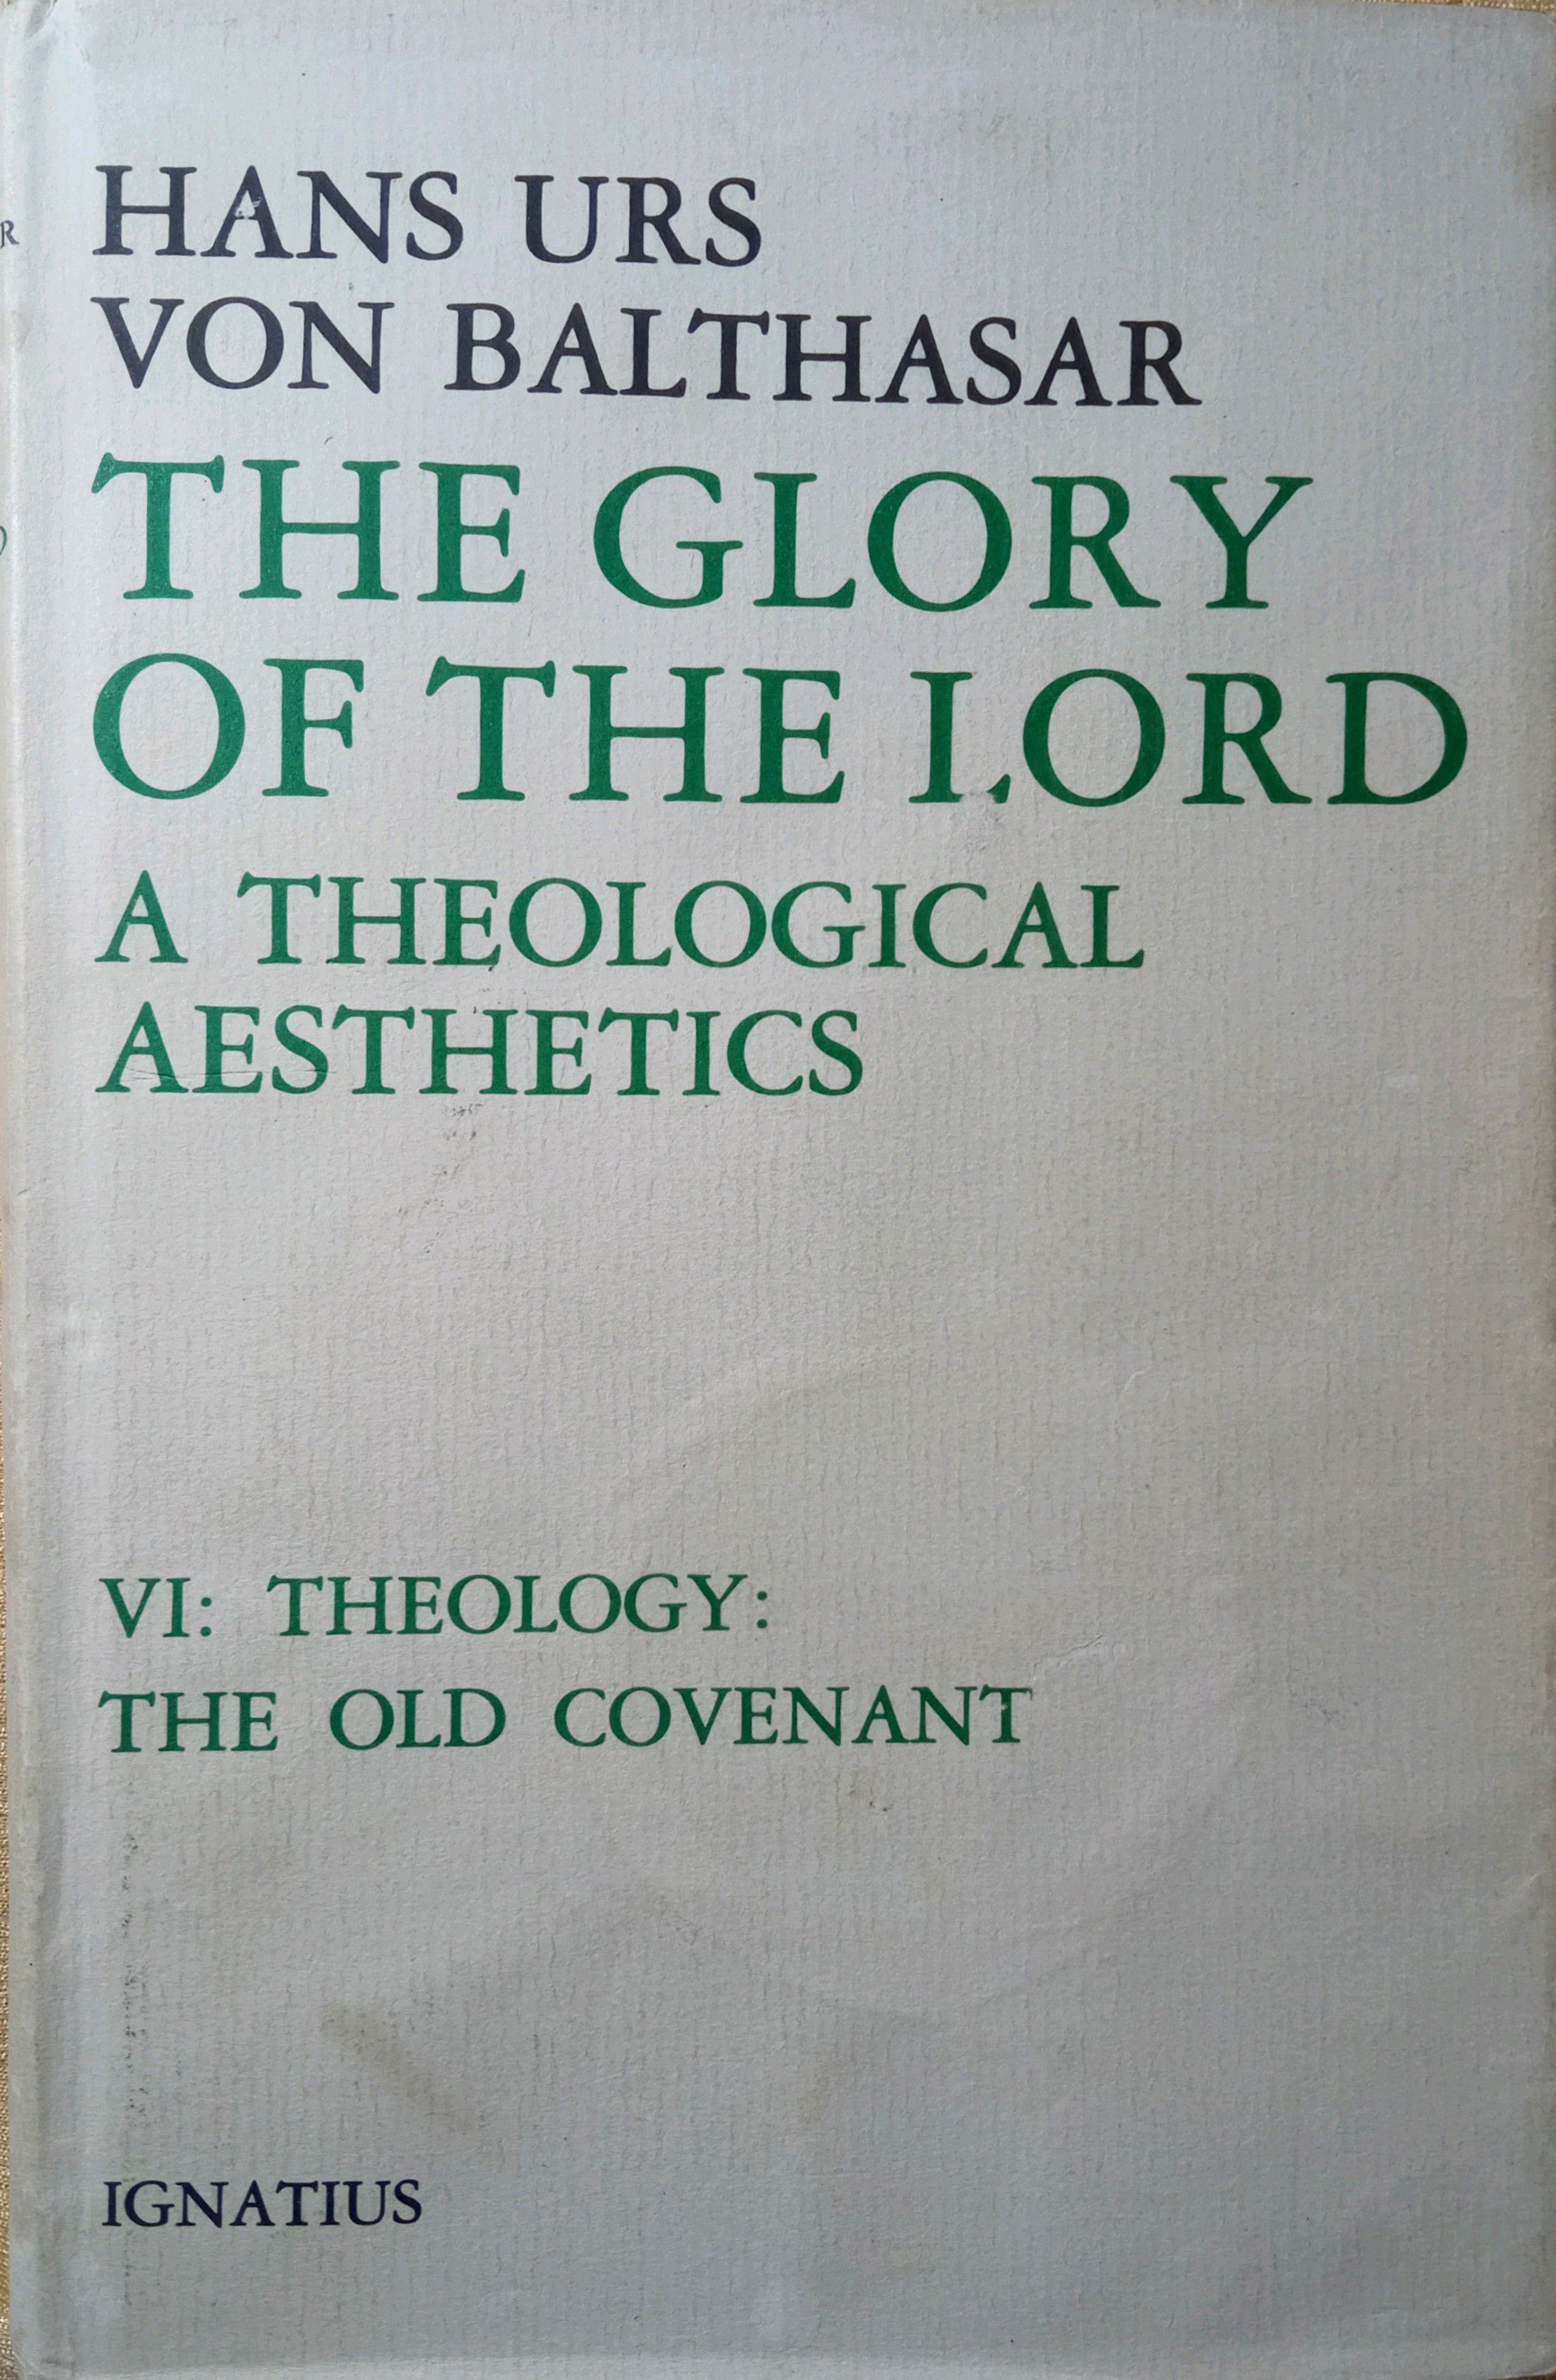 THE GLORY OF THE LORD: A THEOLOGICAL AESTHETICS. THEOLOGY: THE OLD COVENANT